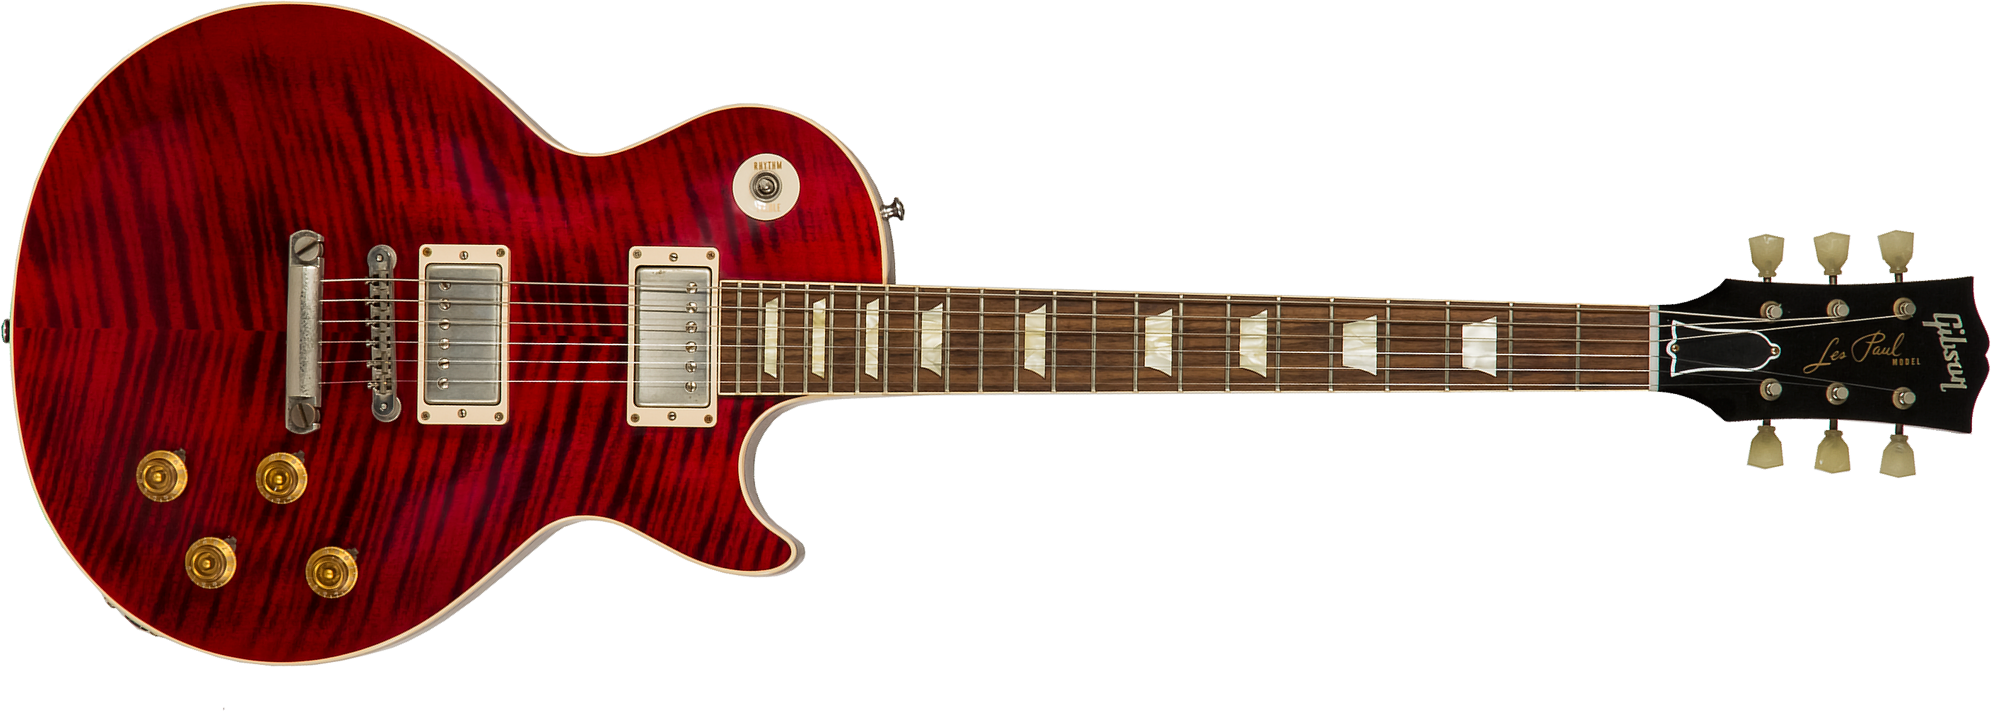 Gibson Custom Shop M2m Les Paul Standard 1959 Reissue 2h Ht Rw #943147 - Vos Red Tiger - Single cut electric guitar - Main picture